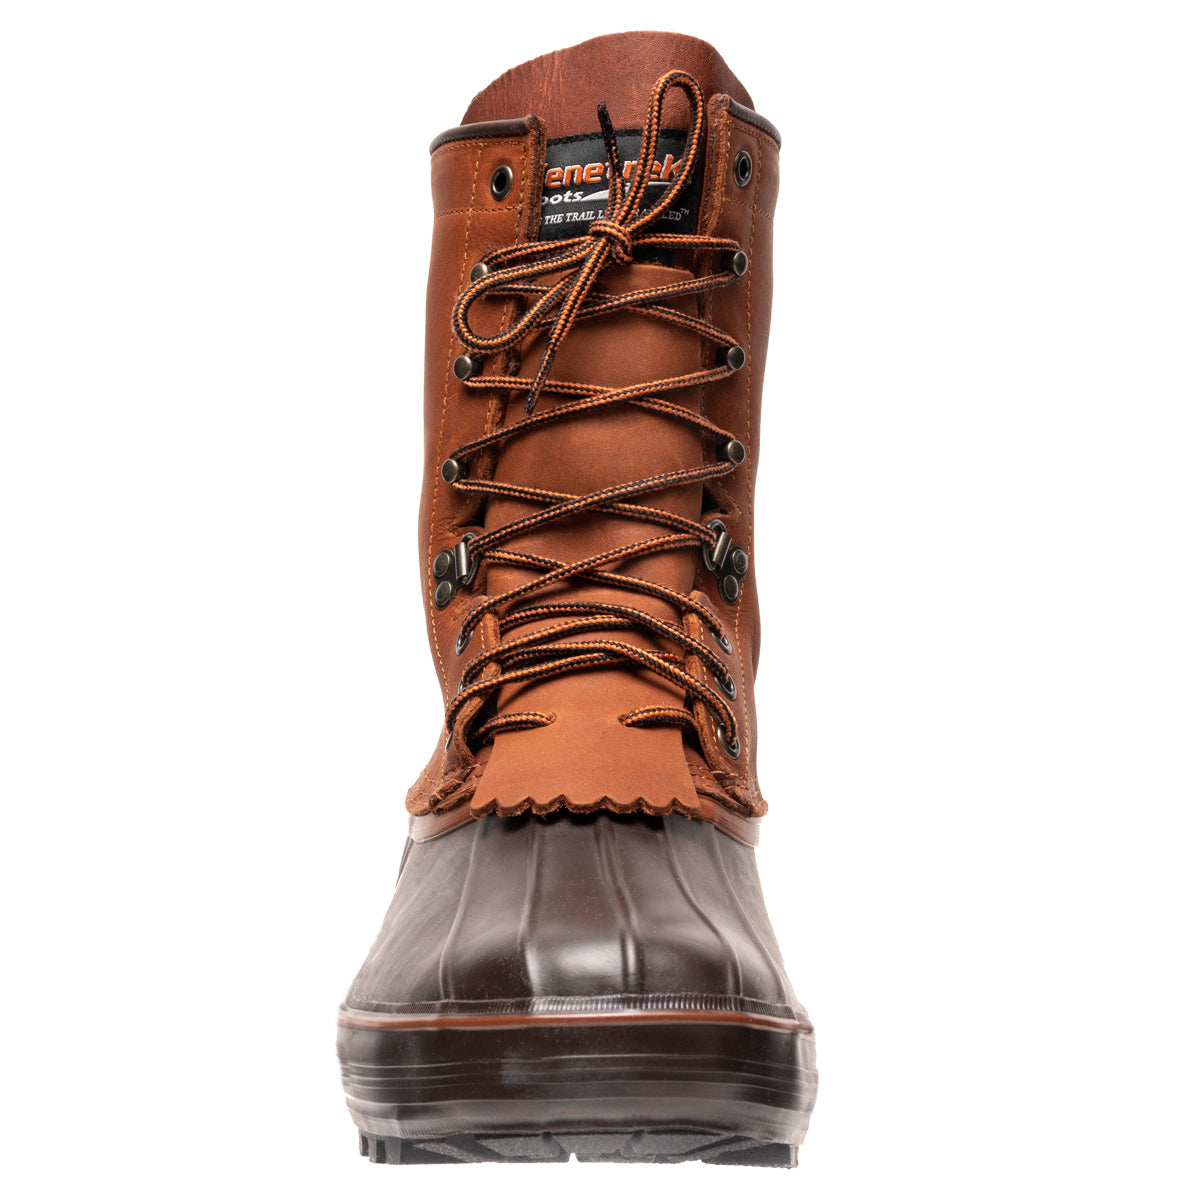 Kenetrek 10" Grizzly Pac Boot (Insulated)